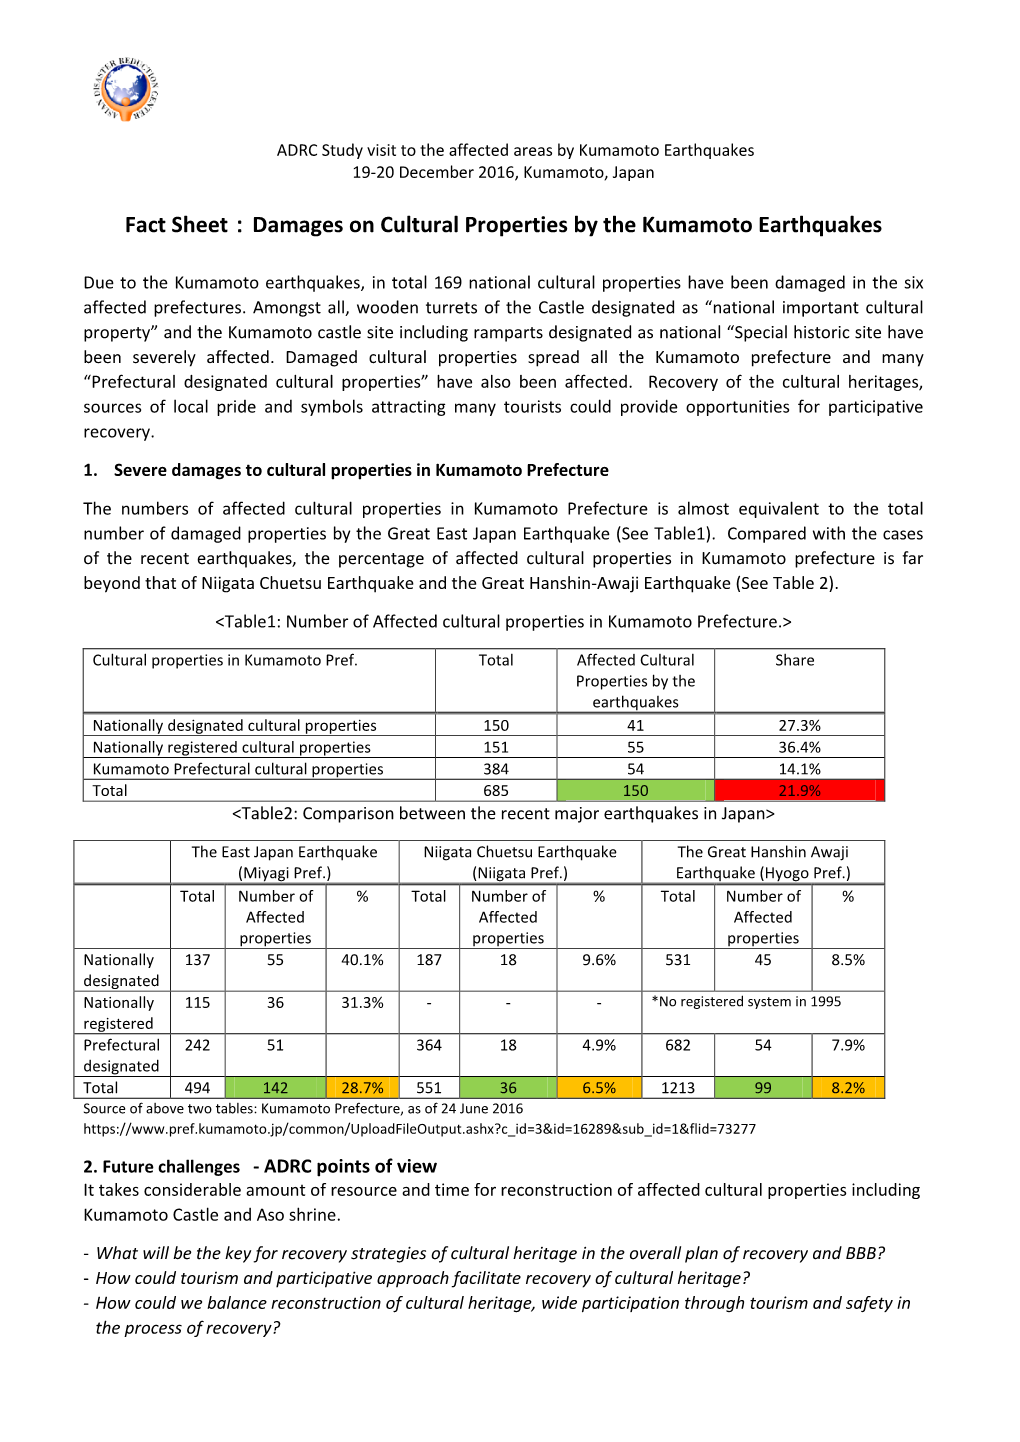 Damages on Cultural Properties by the Kumamoto Earthquakes